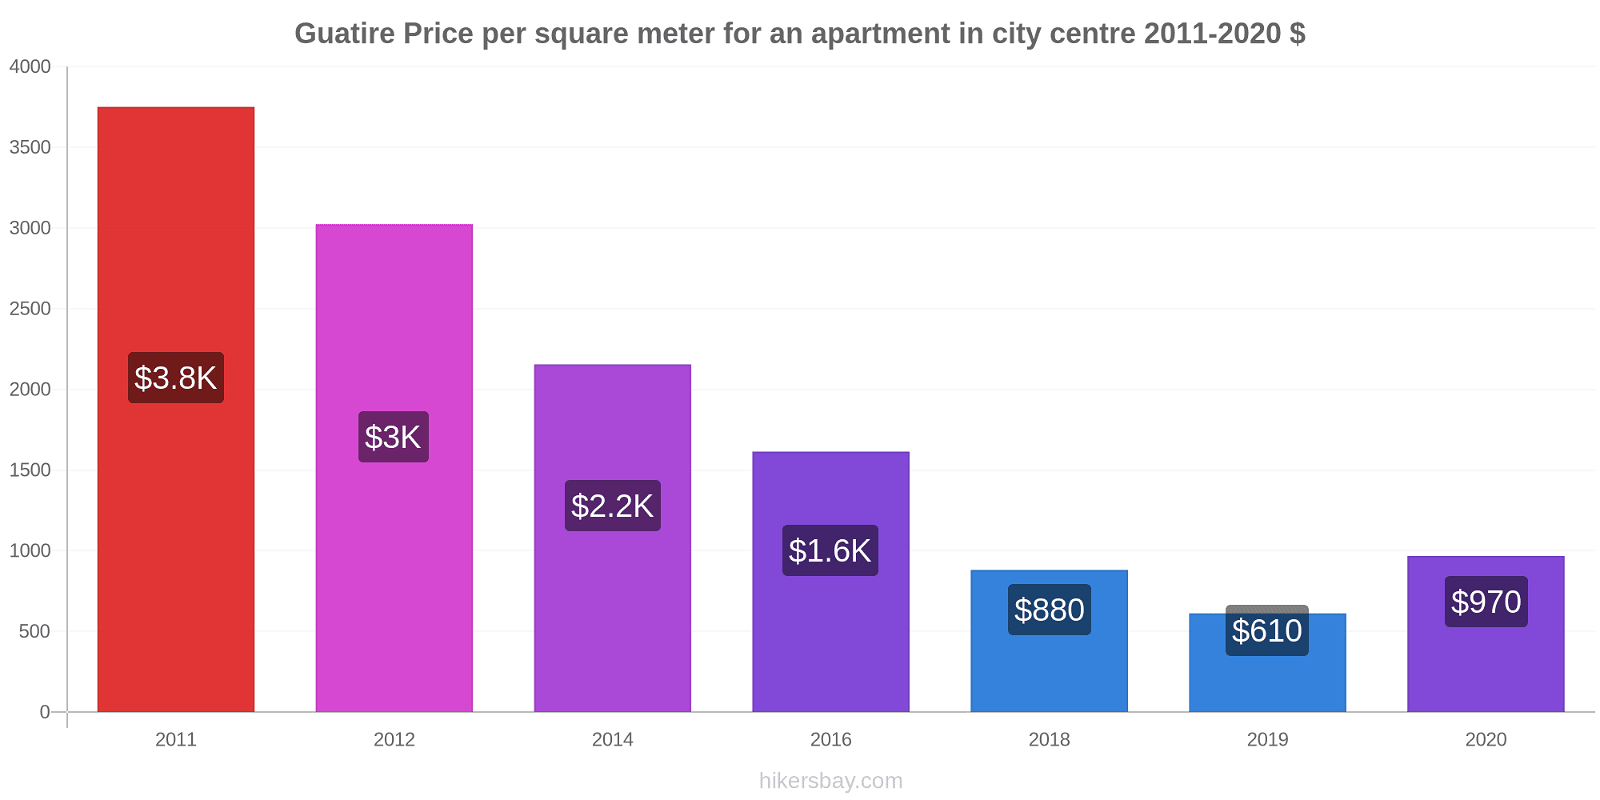 Guatire price changes Price per square meter for an apartment in city centre hikersbay.com